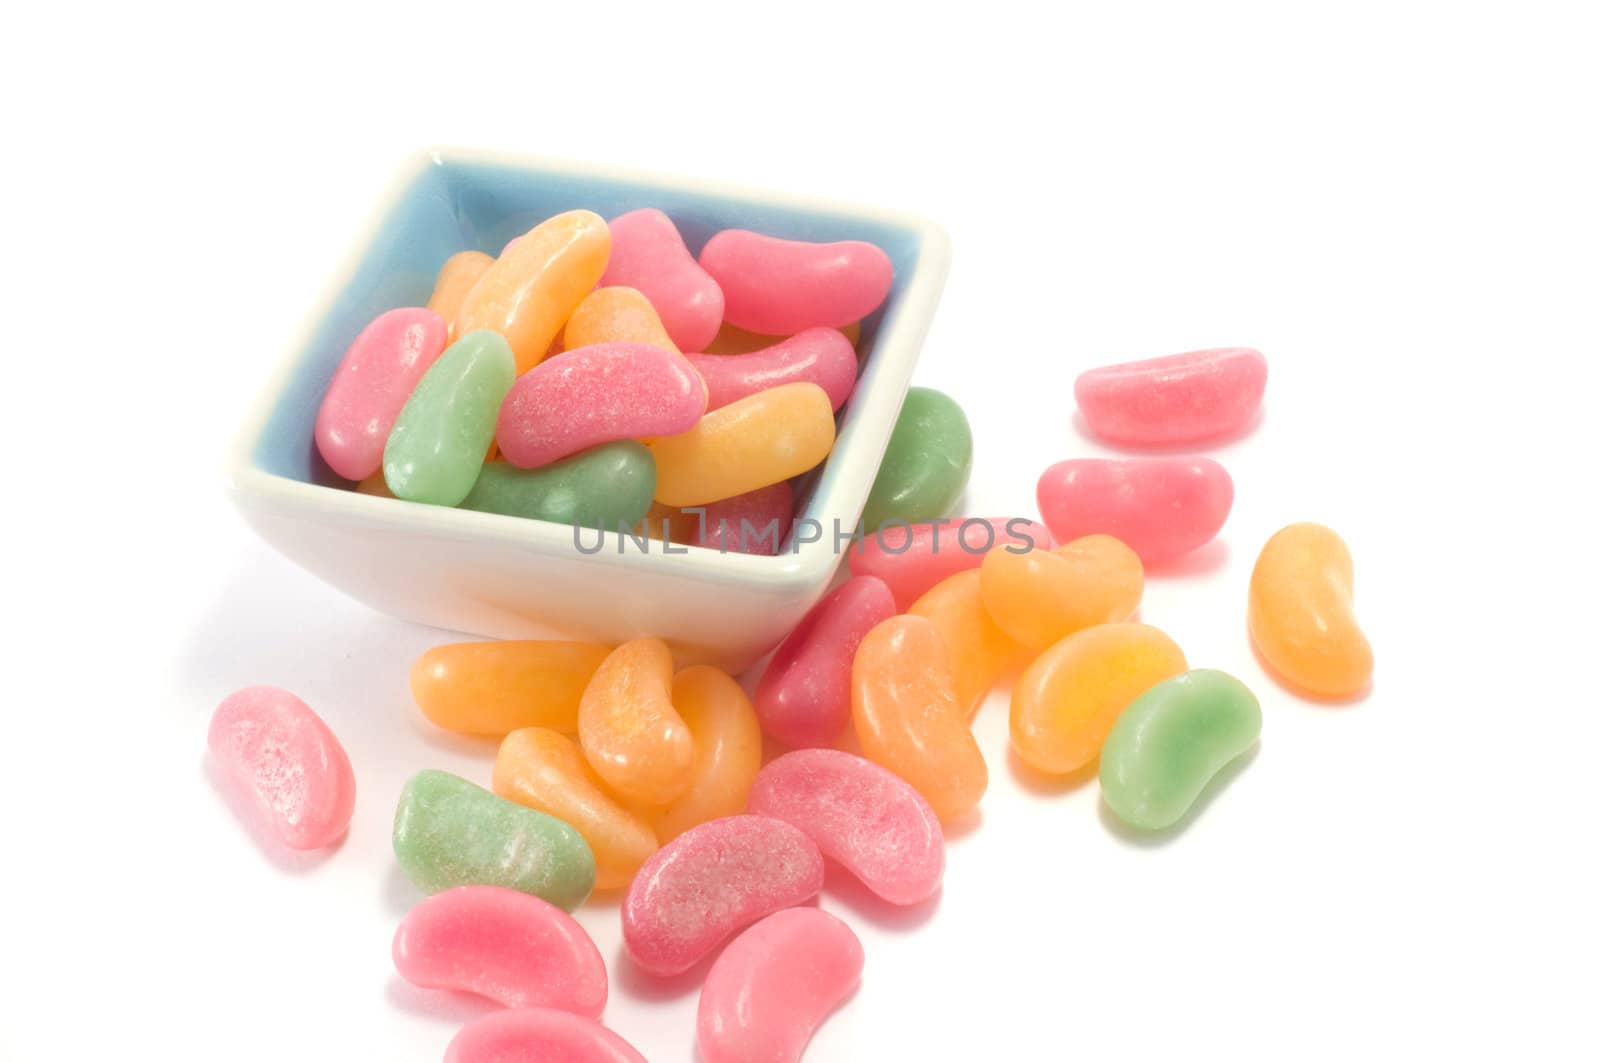 Close up shot of colorful candy